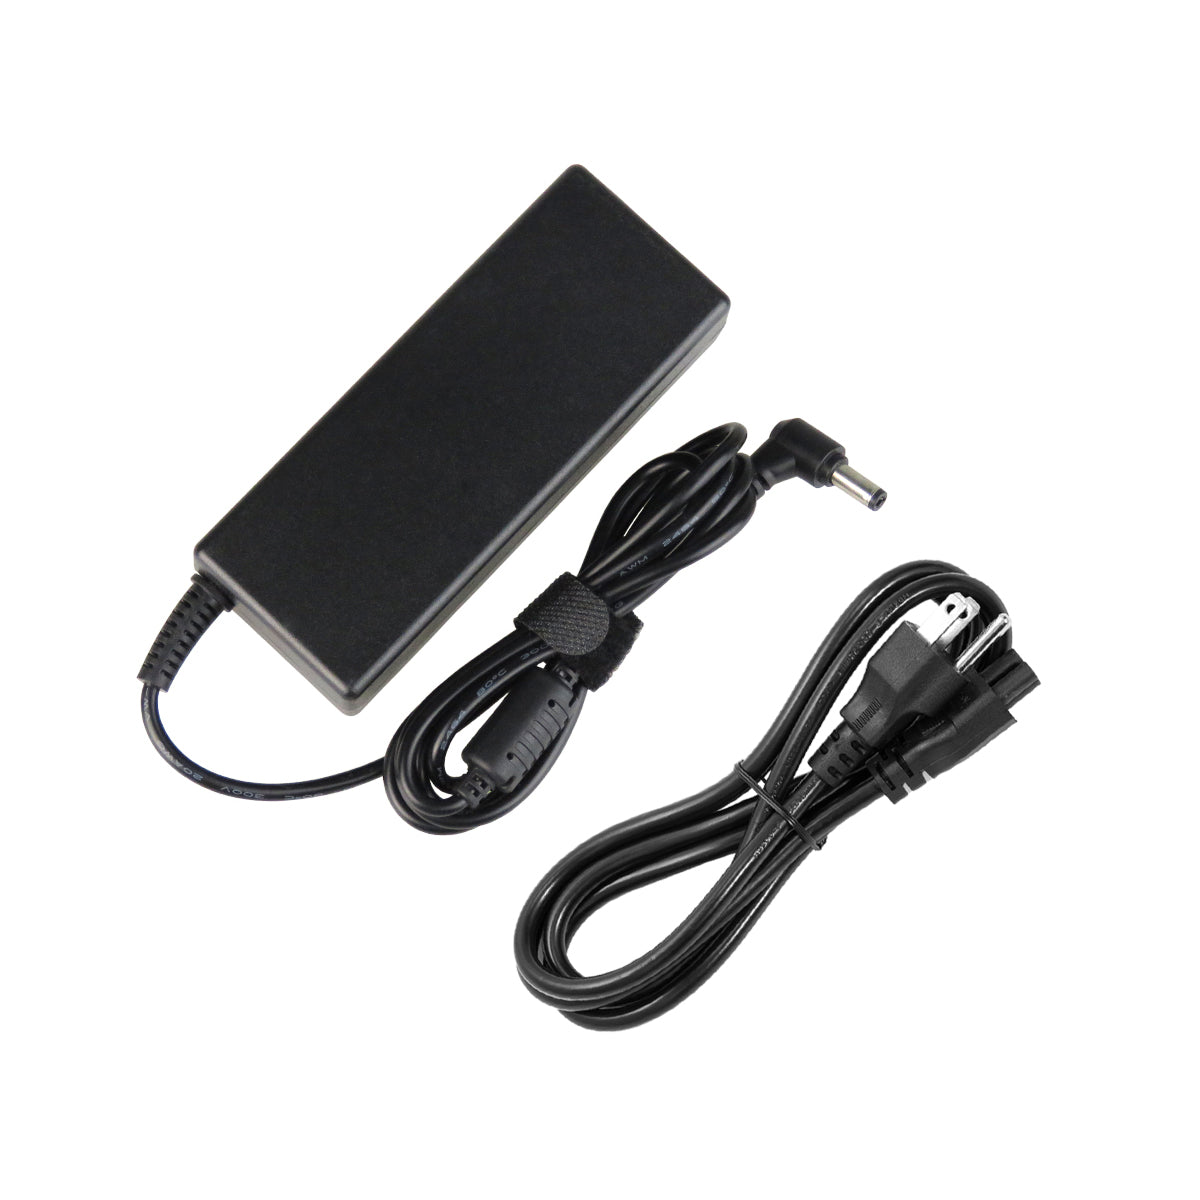 AC Adapter Charger for ASUS U52JC-BBG6 Notebook.